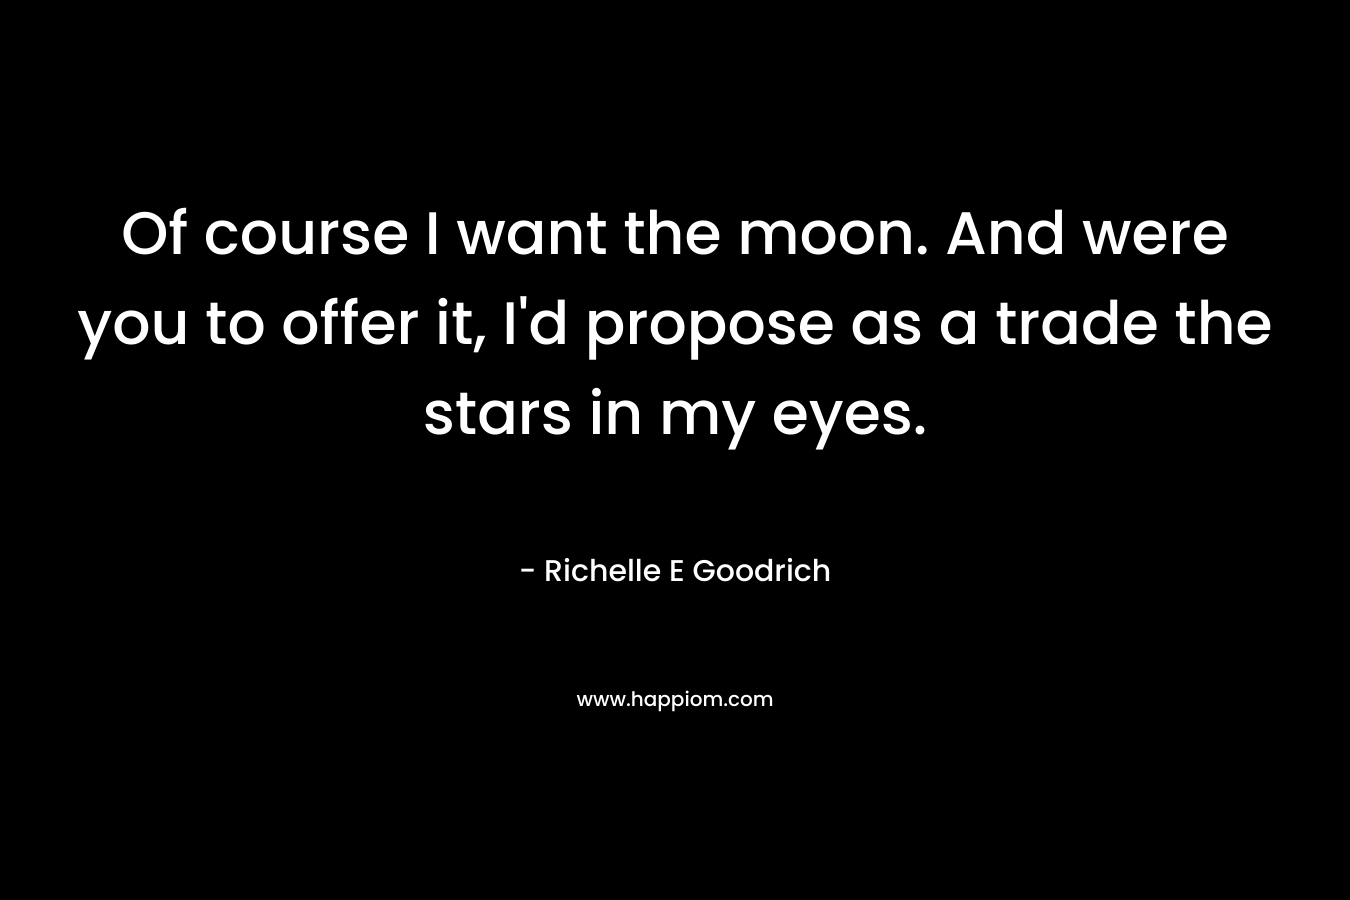 Of course I want the moon. And were you to offer it, I’d propose as a trade the stars in my eyes. – Richelle E Goodrich